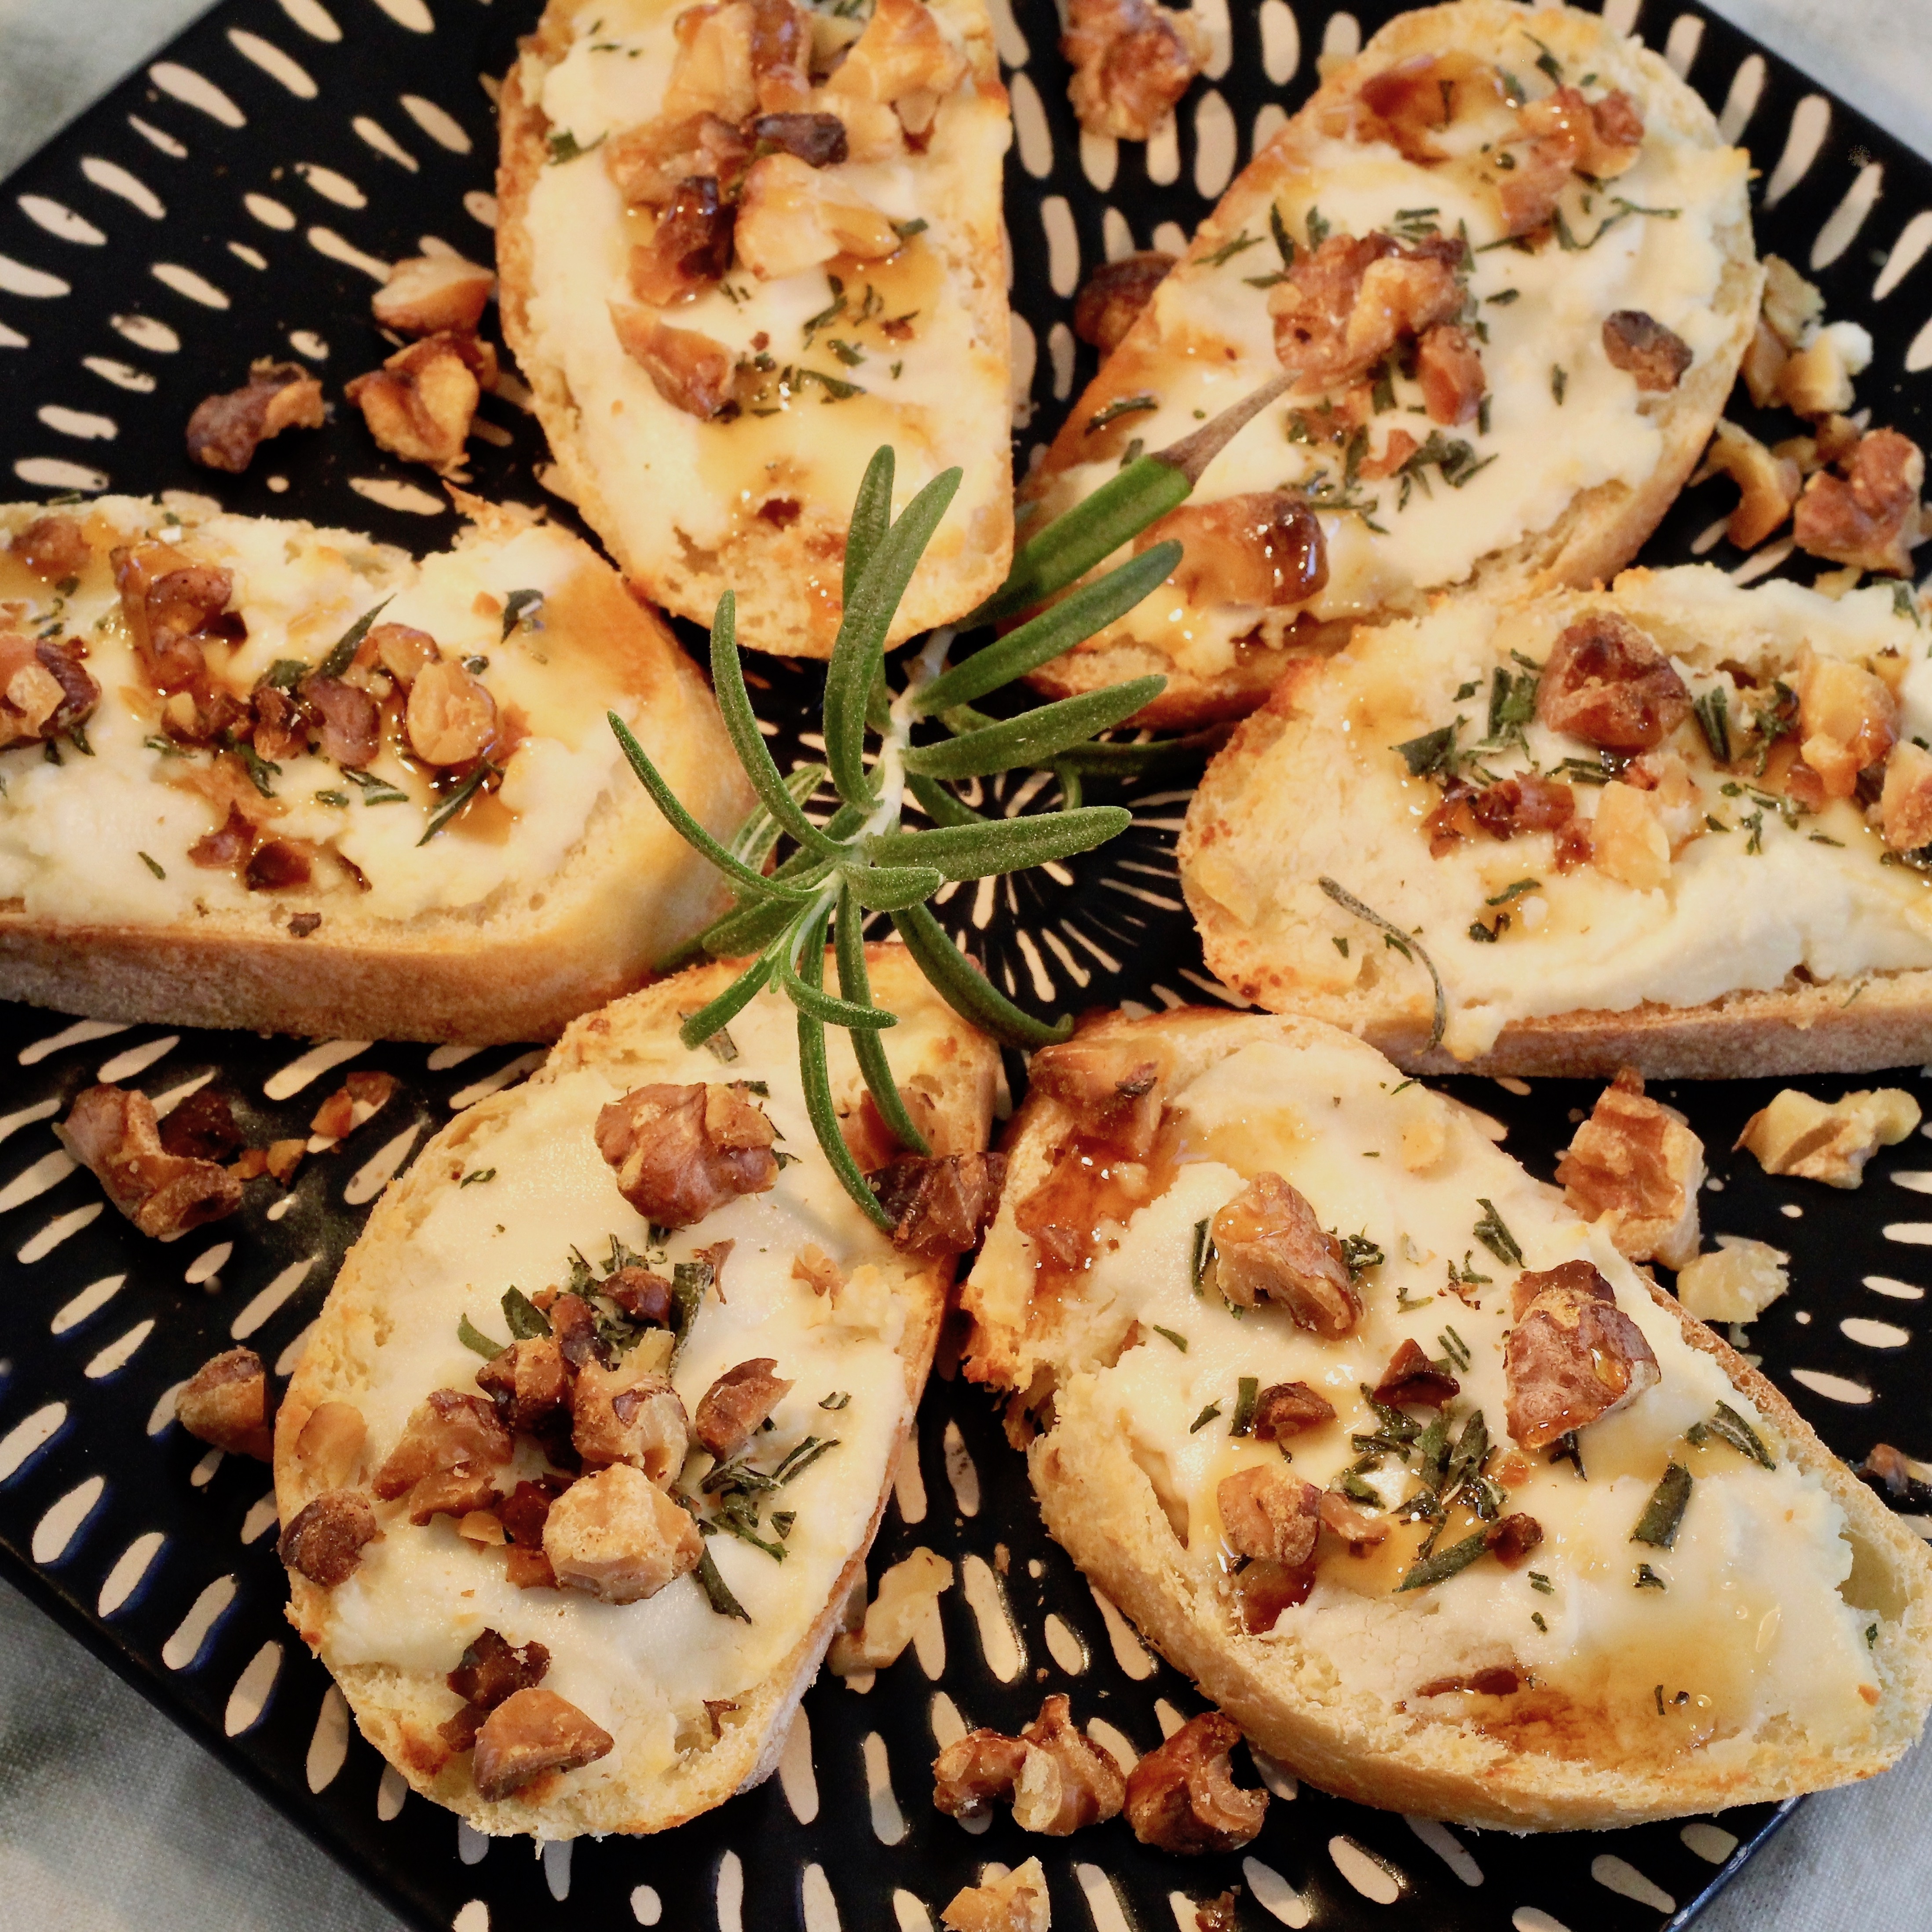 Rosemary and Goat Cheese Crostini with Walnuts and Honey